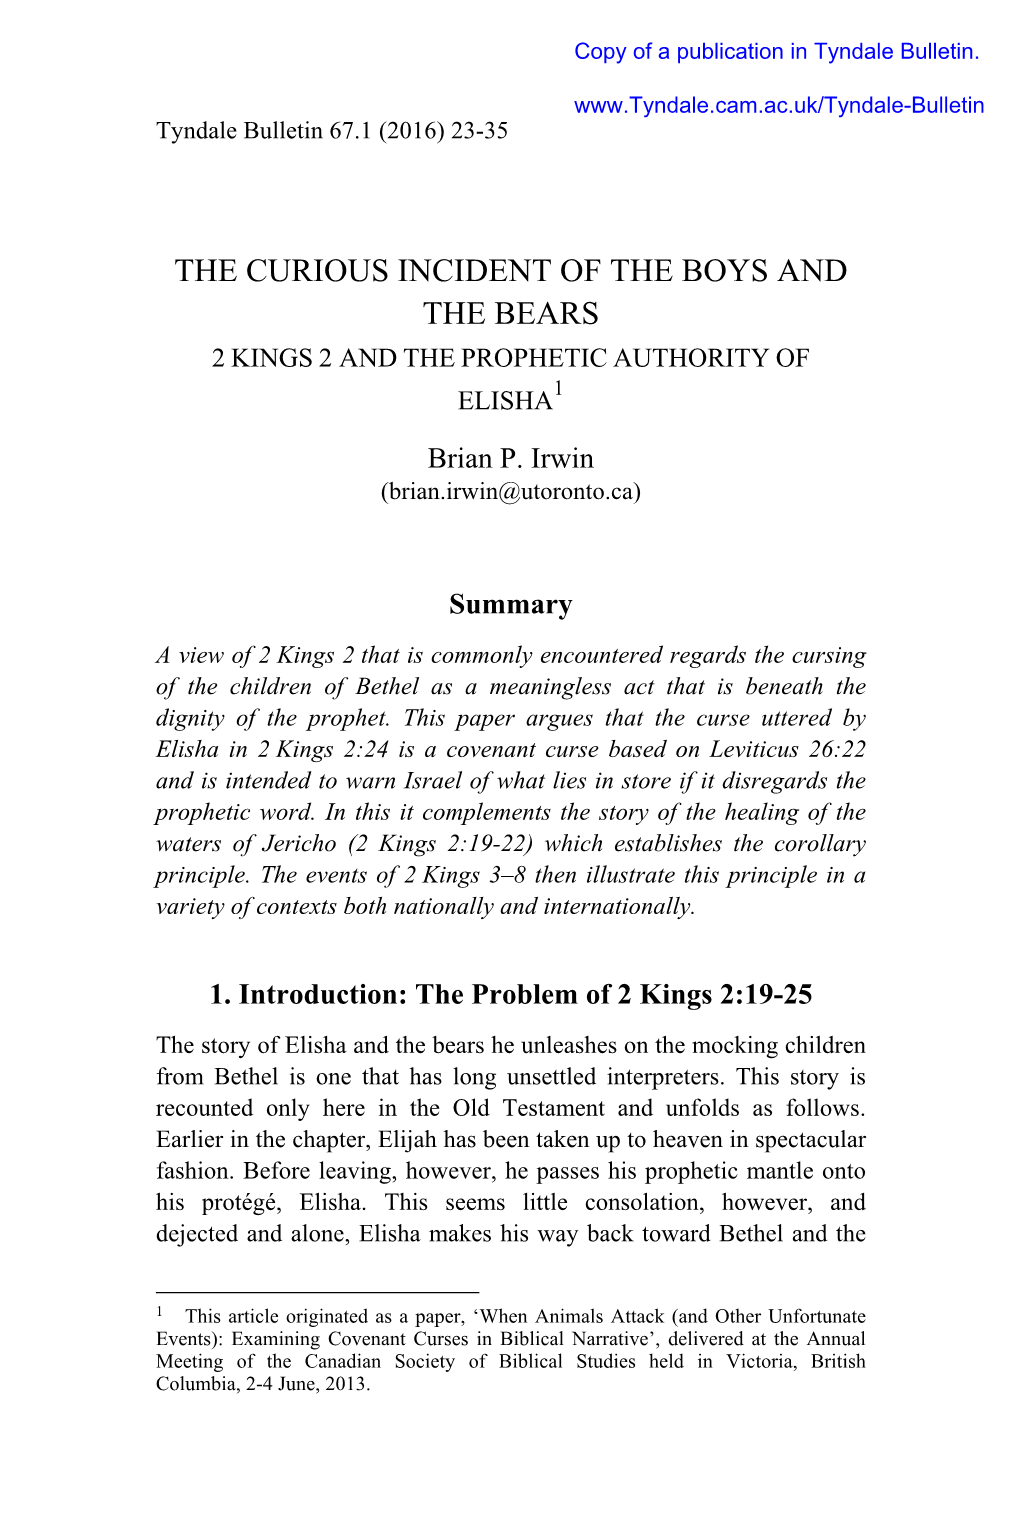 The Curious Incident of the Boys and the Bears: 2 Kings 2 and the Prophetic Authority